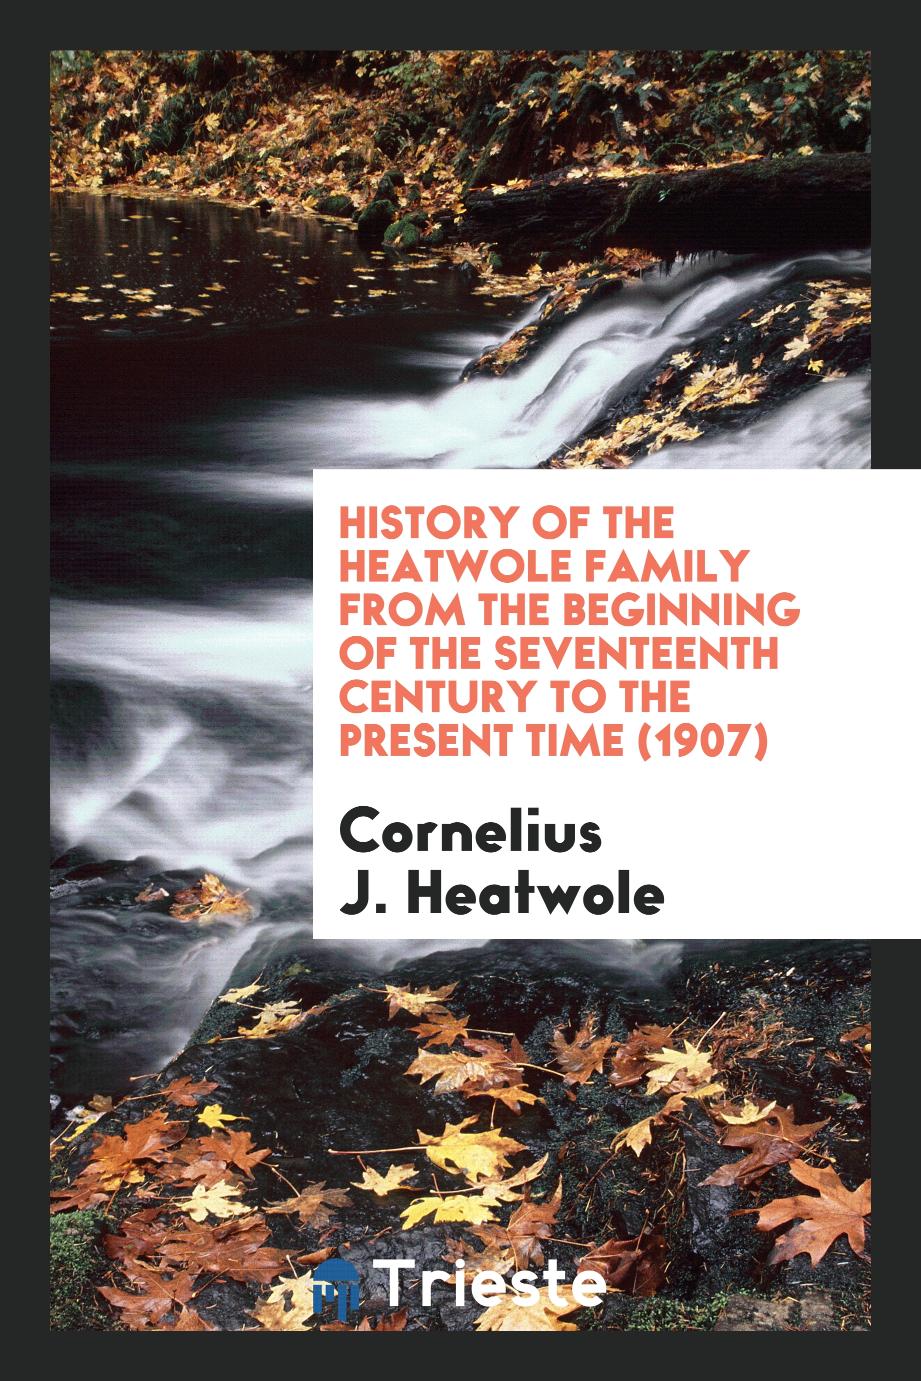 History of the Heatwole Family from the Beginning of the Seventeenth Century to the Present Time (1907)